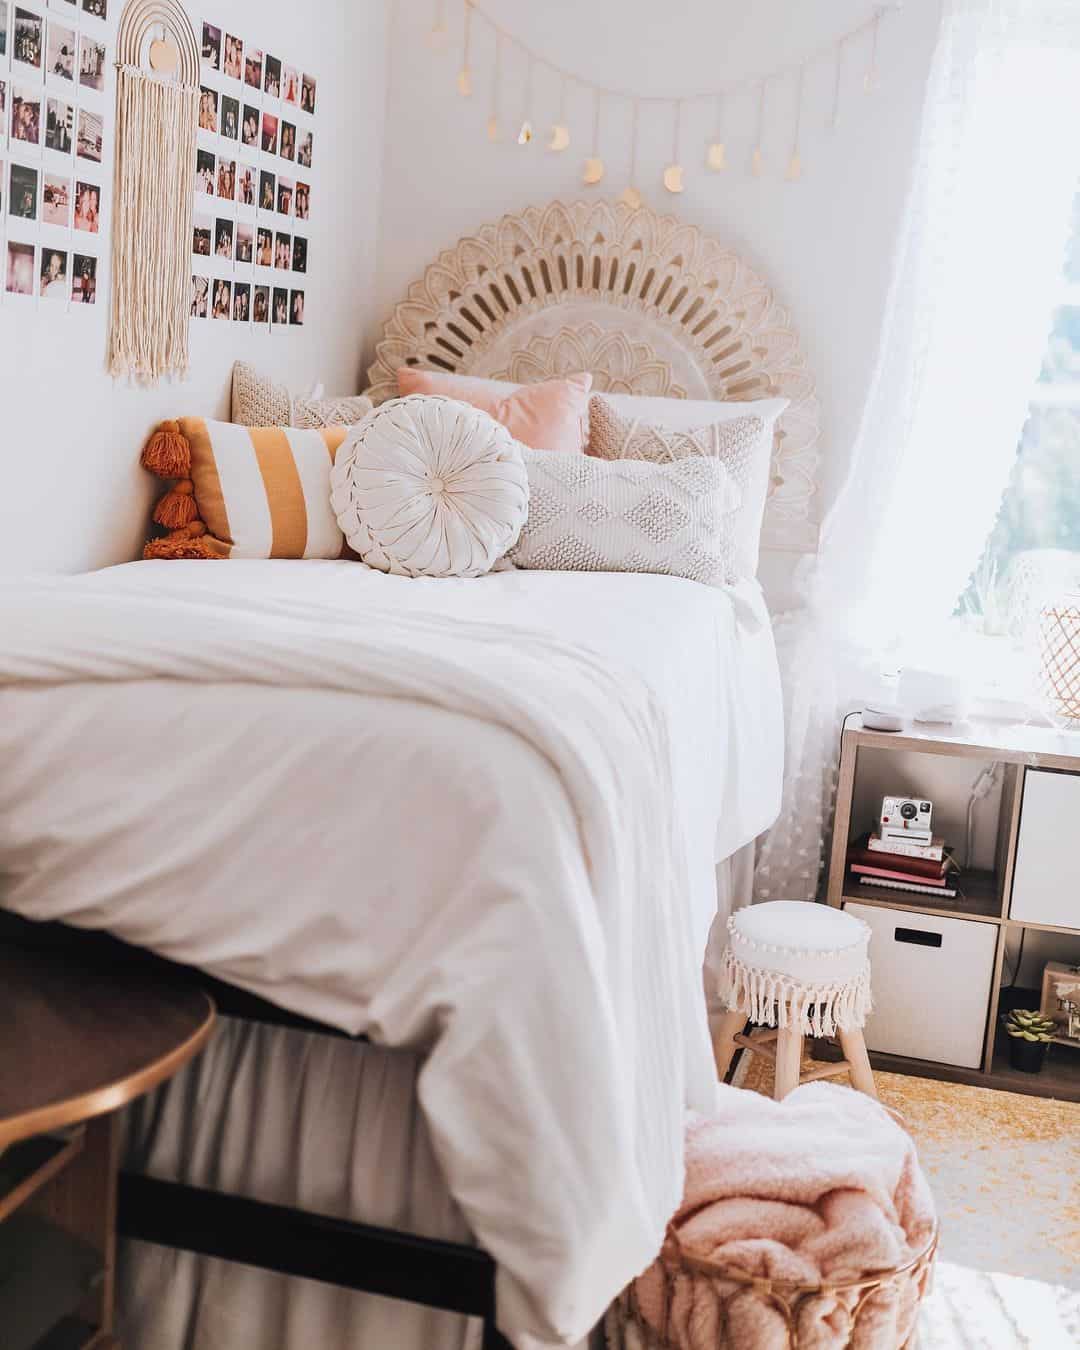 The Ultimate Dorm Room essentials For Girls You Need Throughout College ...